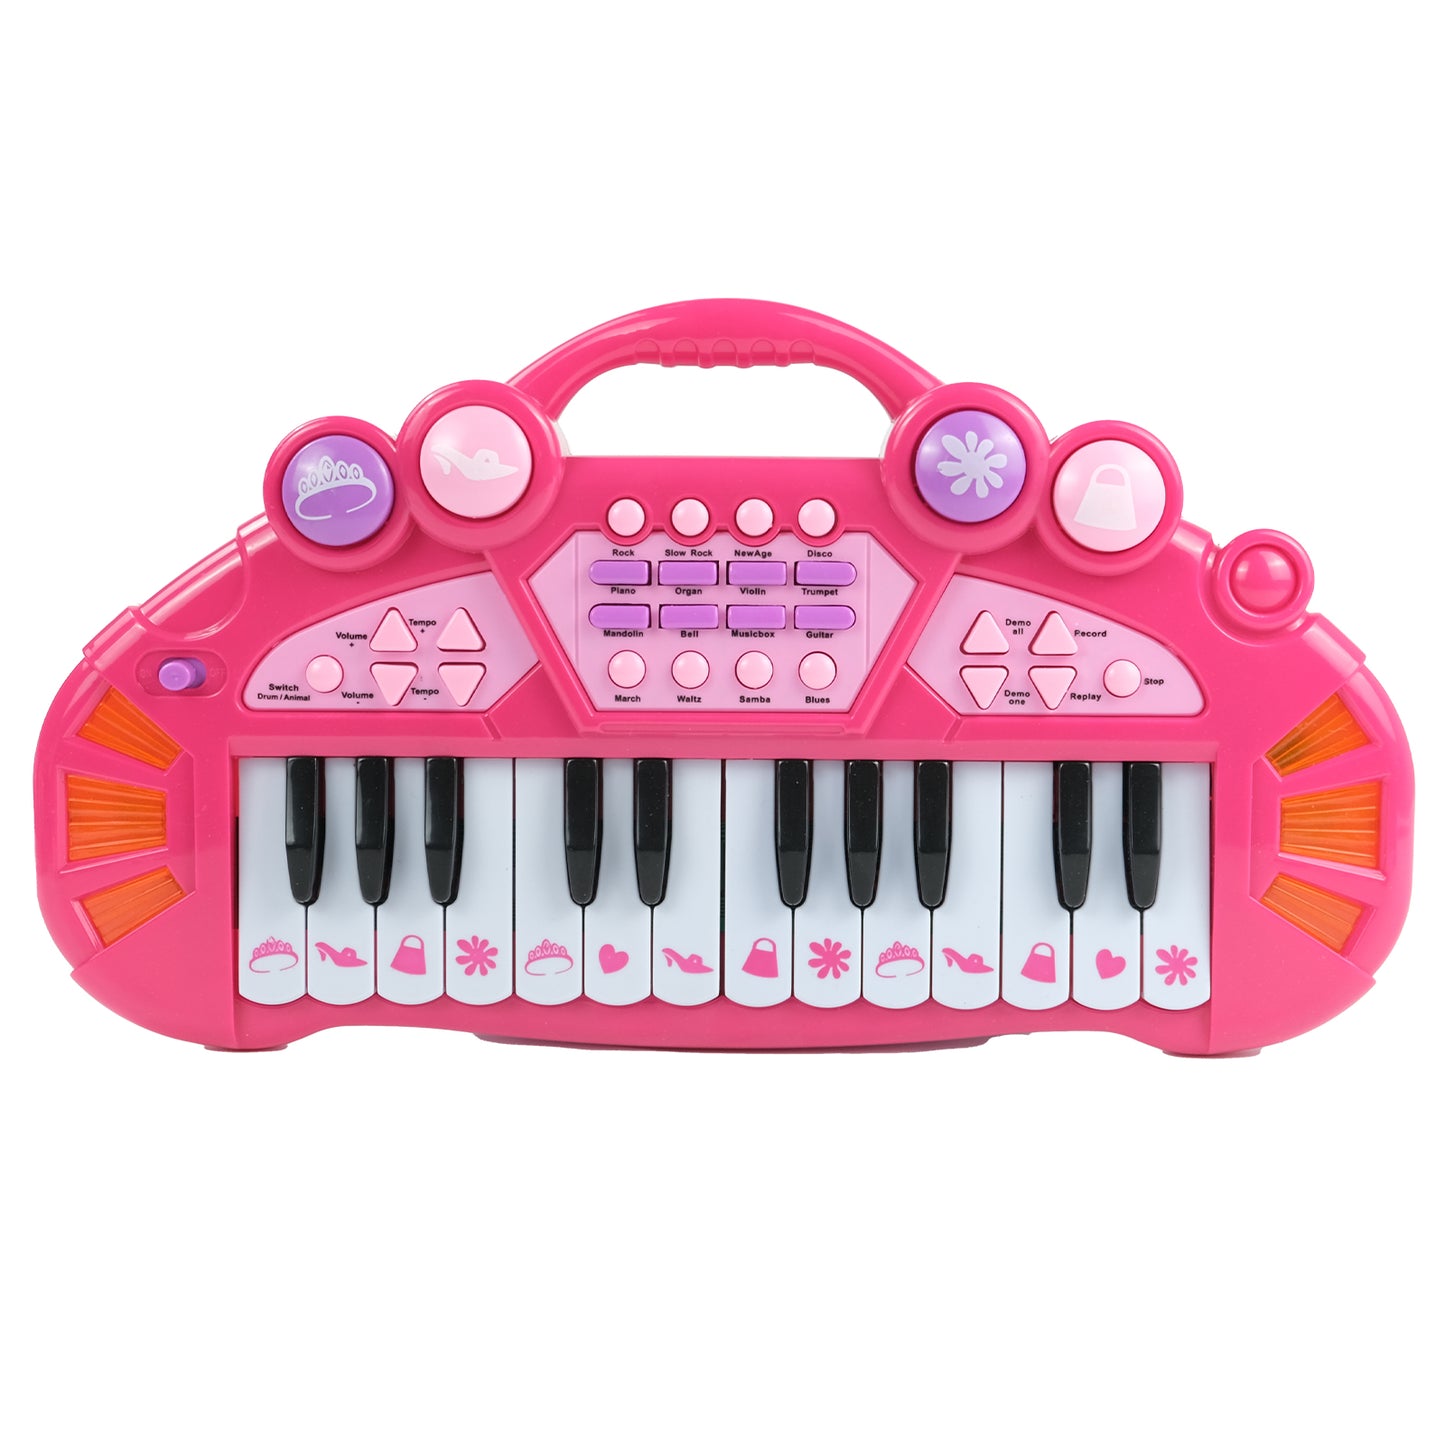 AOQIMITENJOY Musical Instrument Electronic 24 Keys Keyboard Toys LED Lighting Children's Toys Birthday Gifts for Boys and Girls 3 Year Old+ HK-8030A